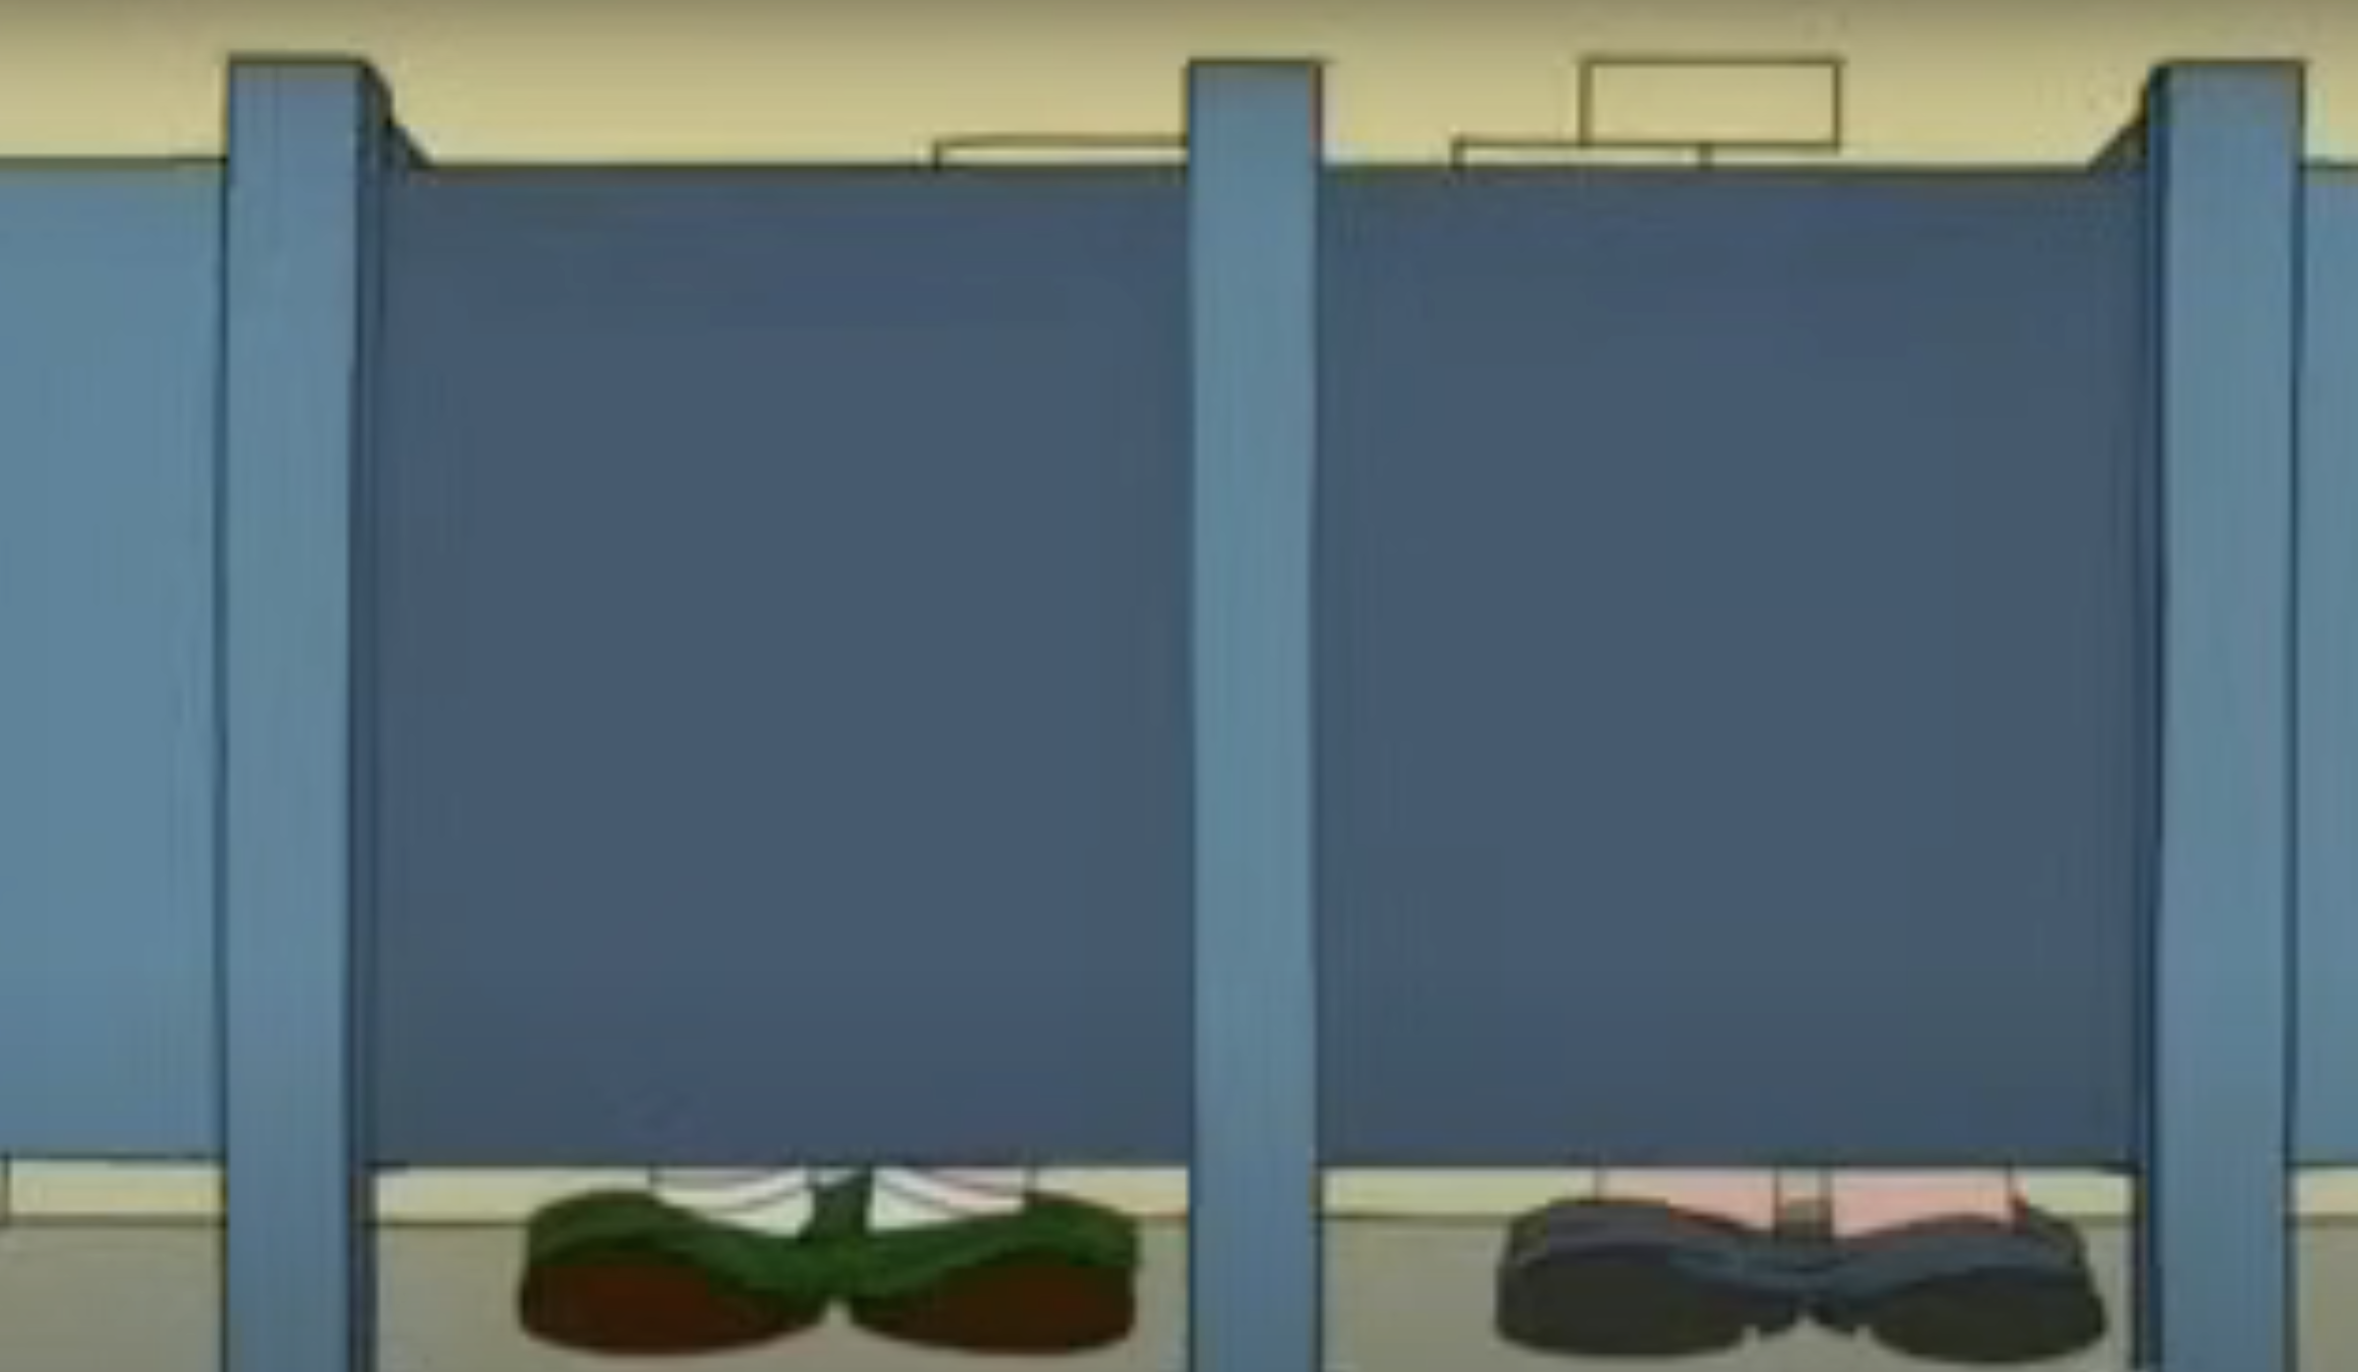 Extra-large shoes under stall doors in an animated cartoon